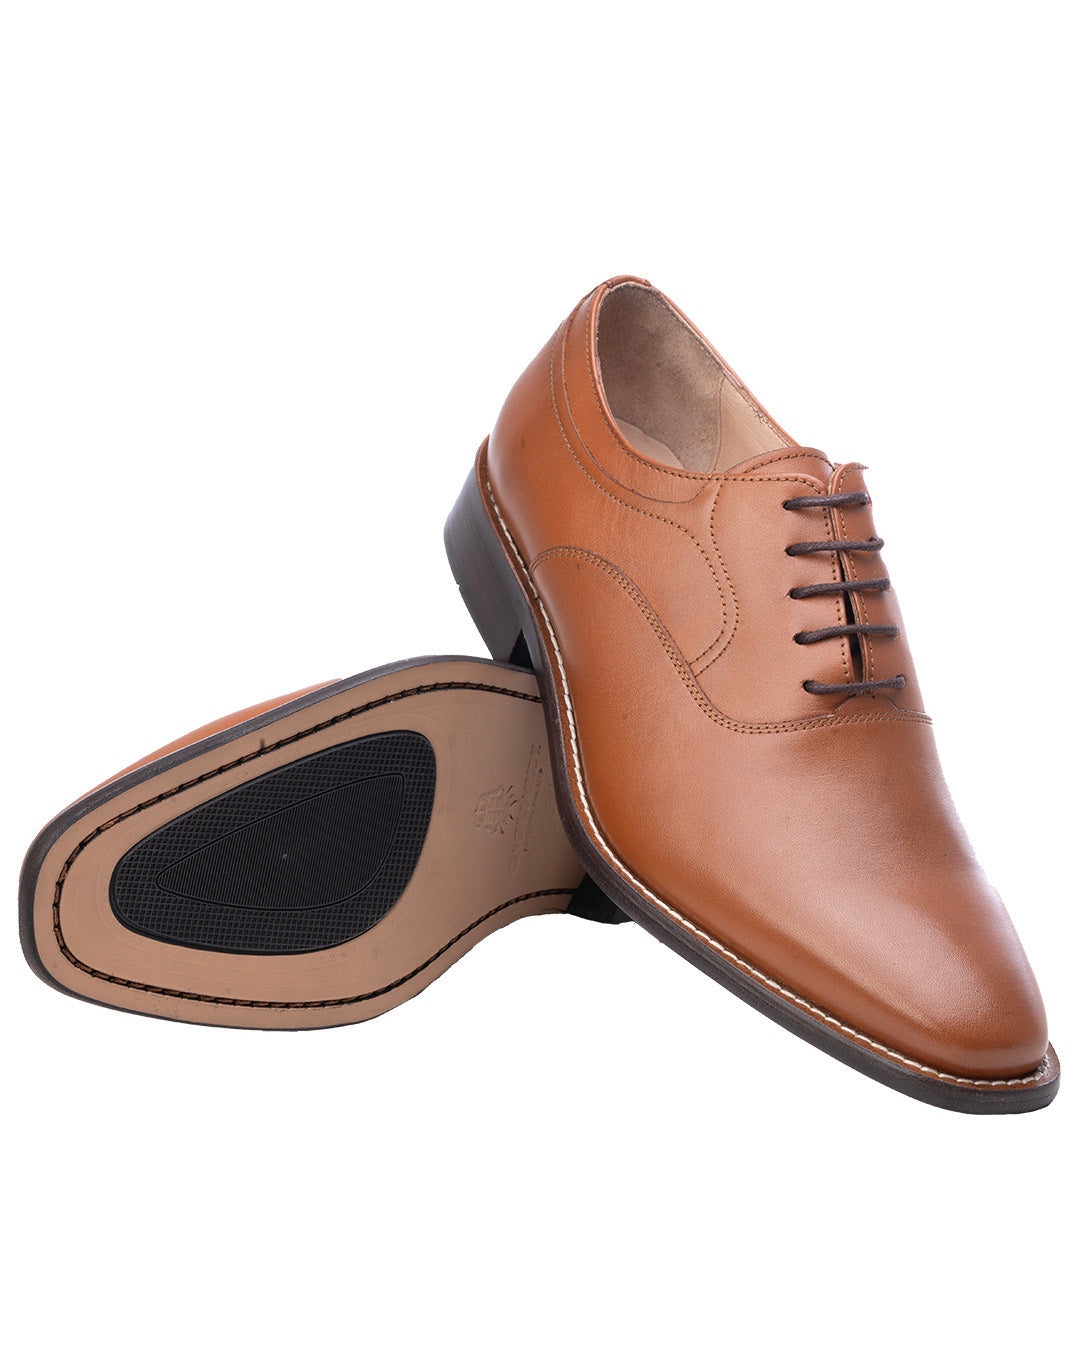 Tan Lace Up Leather Shoes